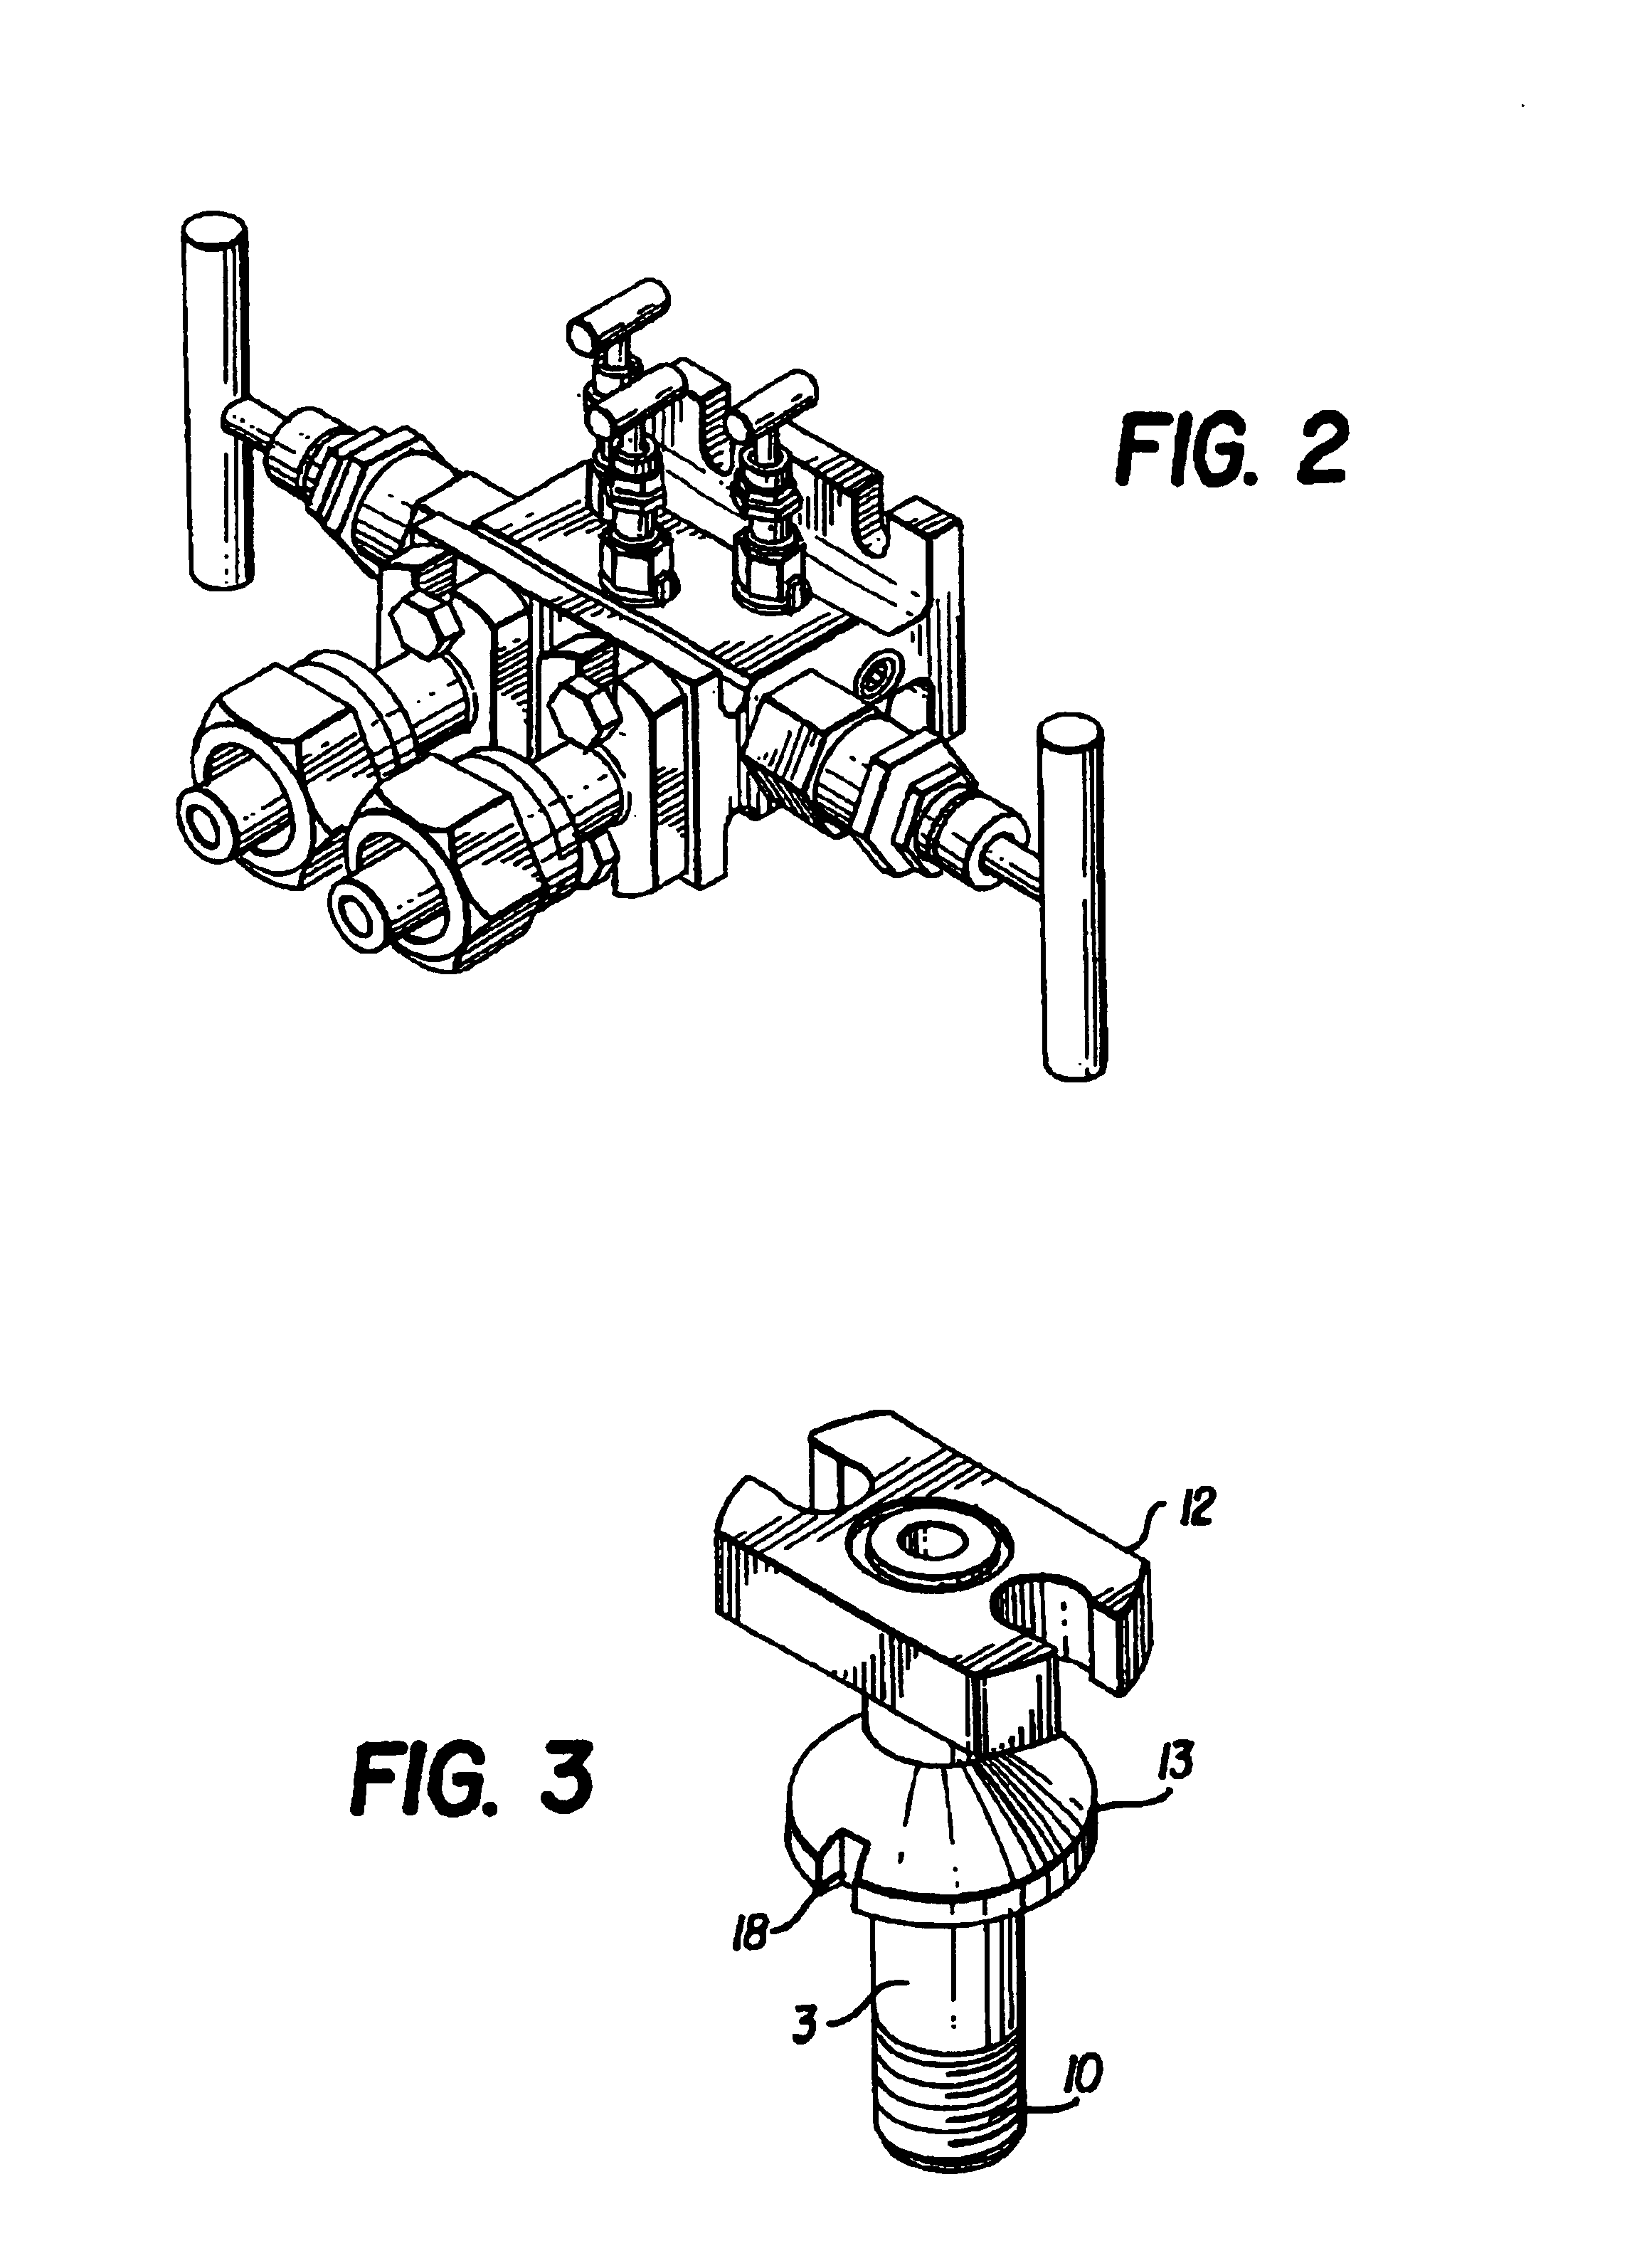 Stabilized tap mounting assembly